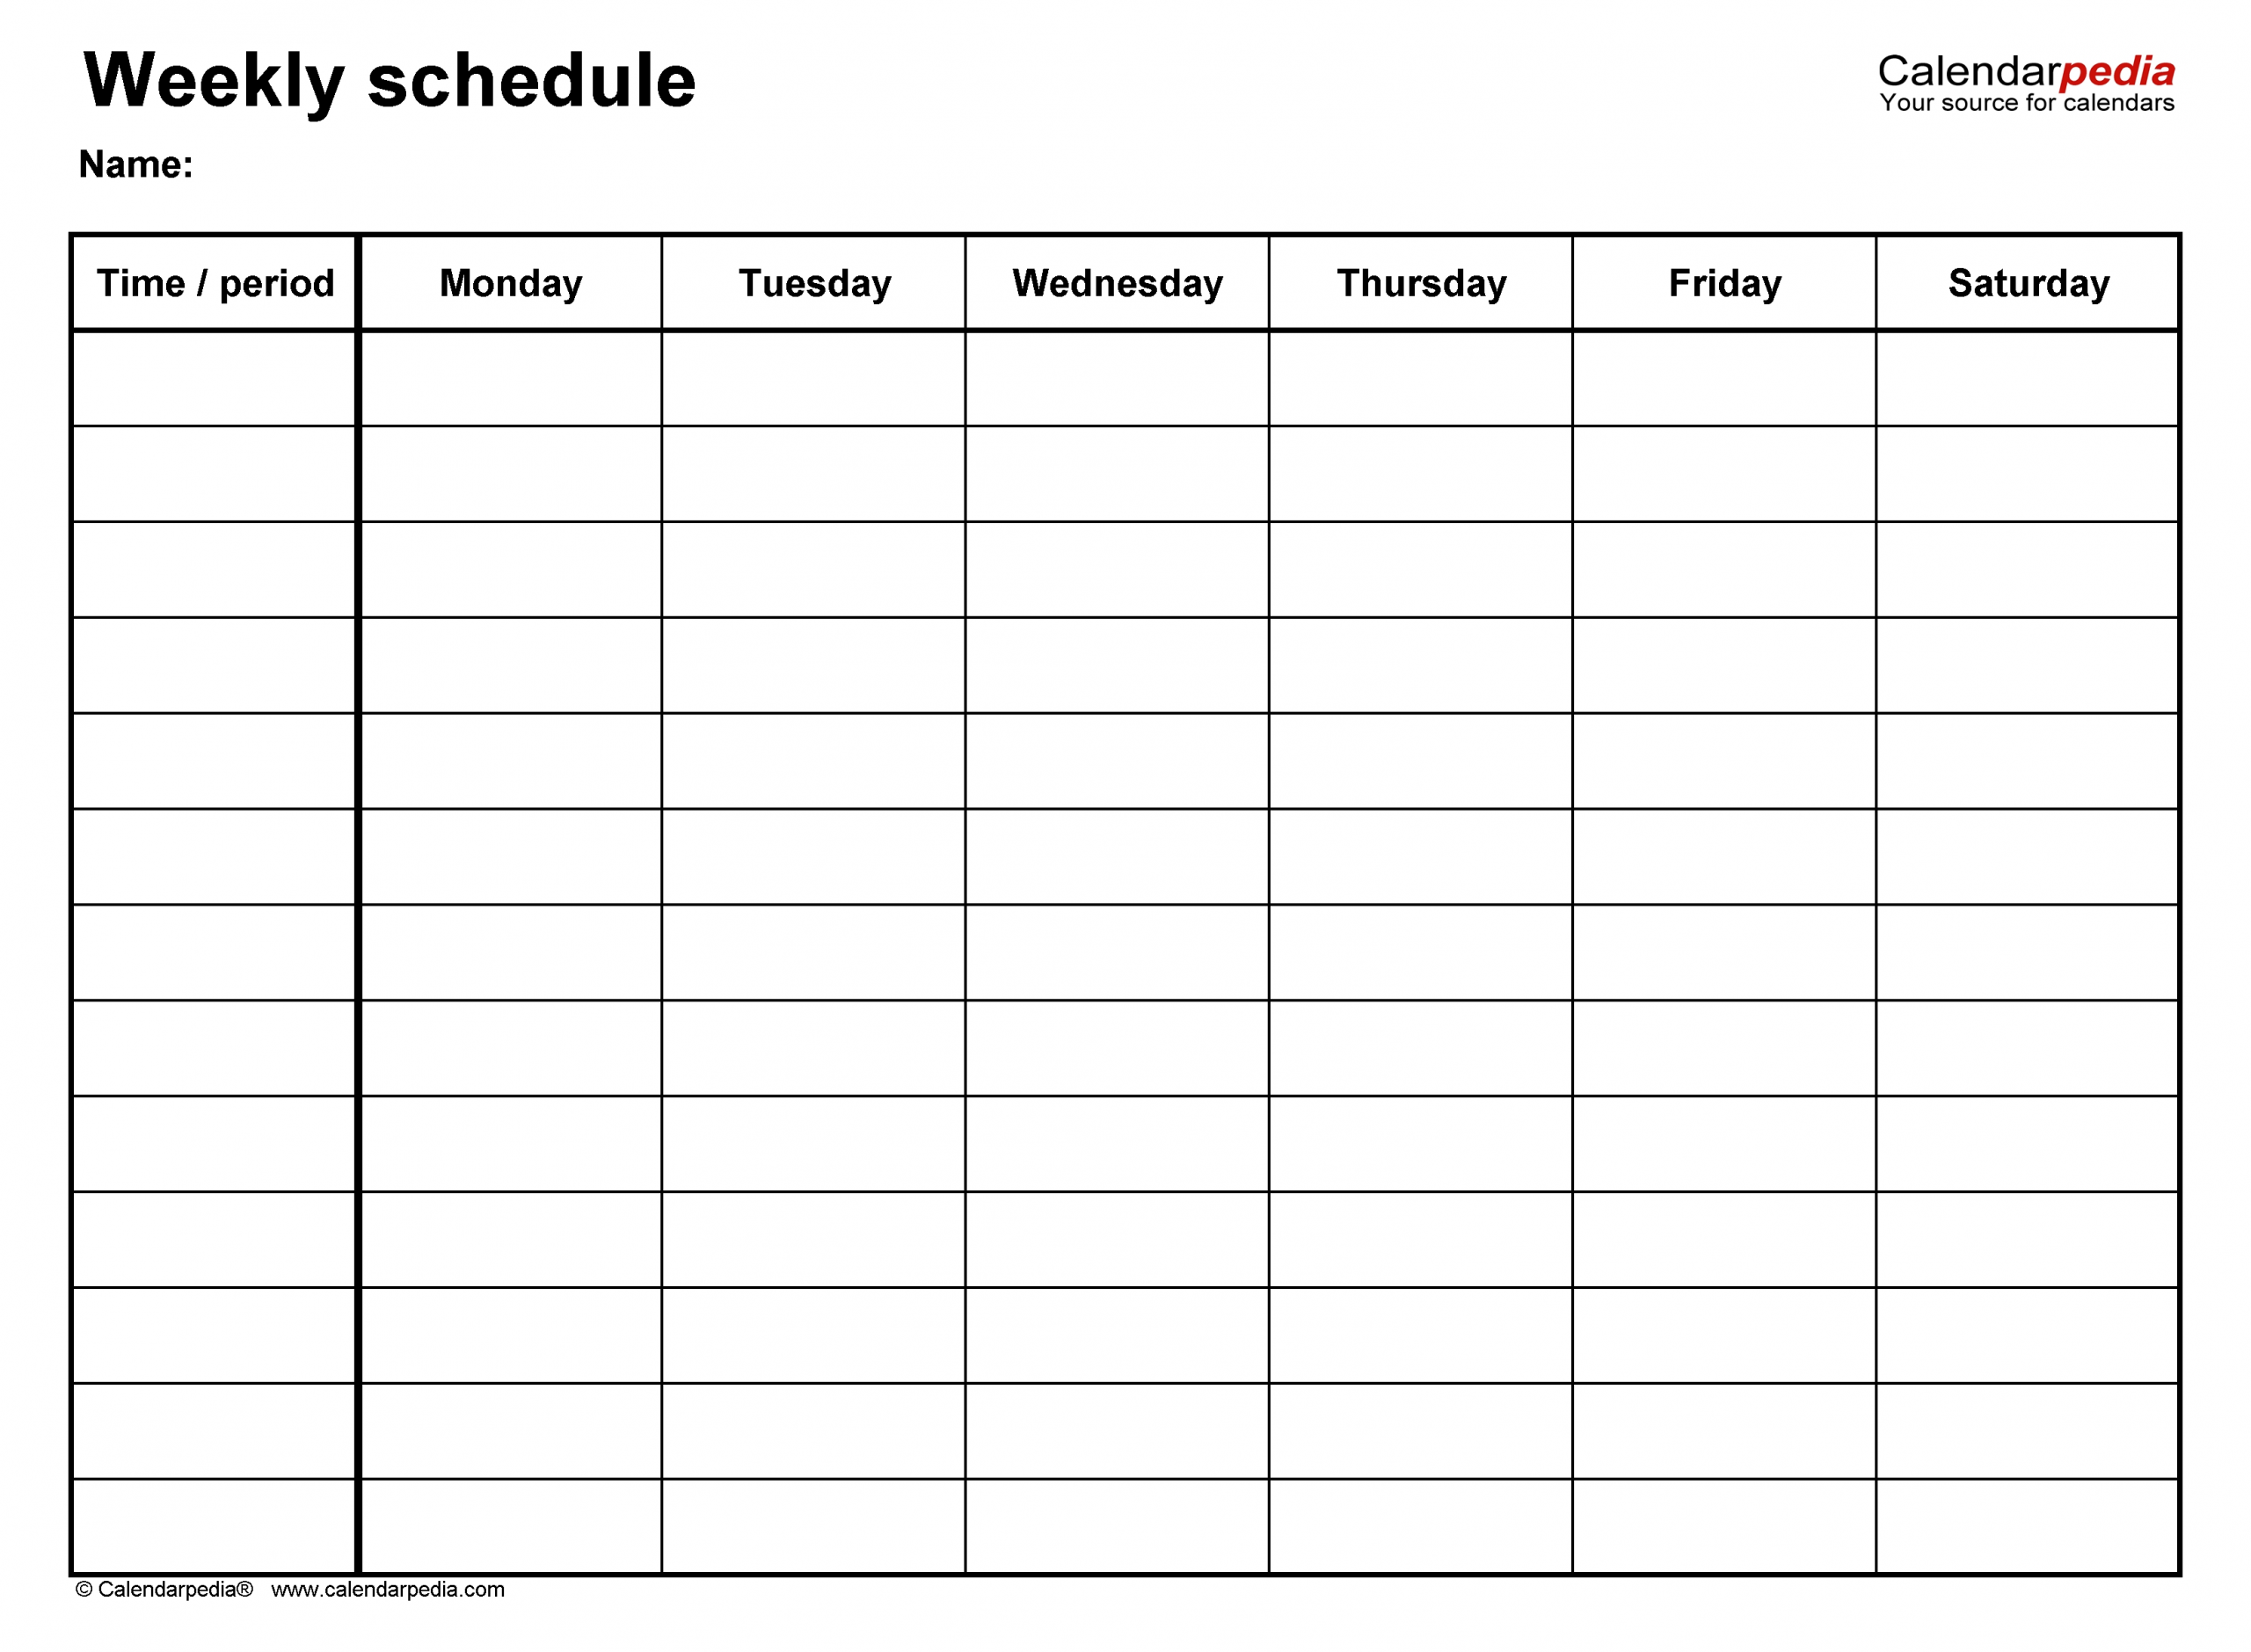 Free Weekly Schedule Templates For Excel - 18 Templates  7 Day Calendar